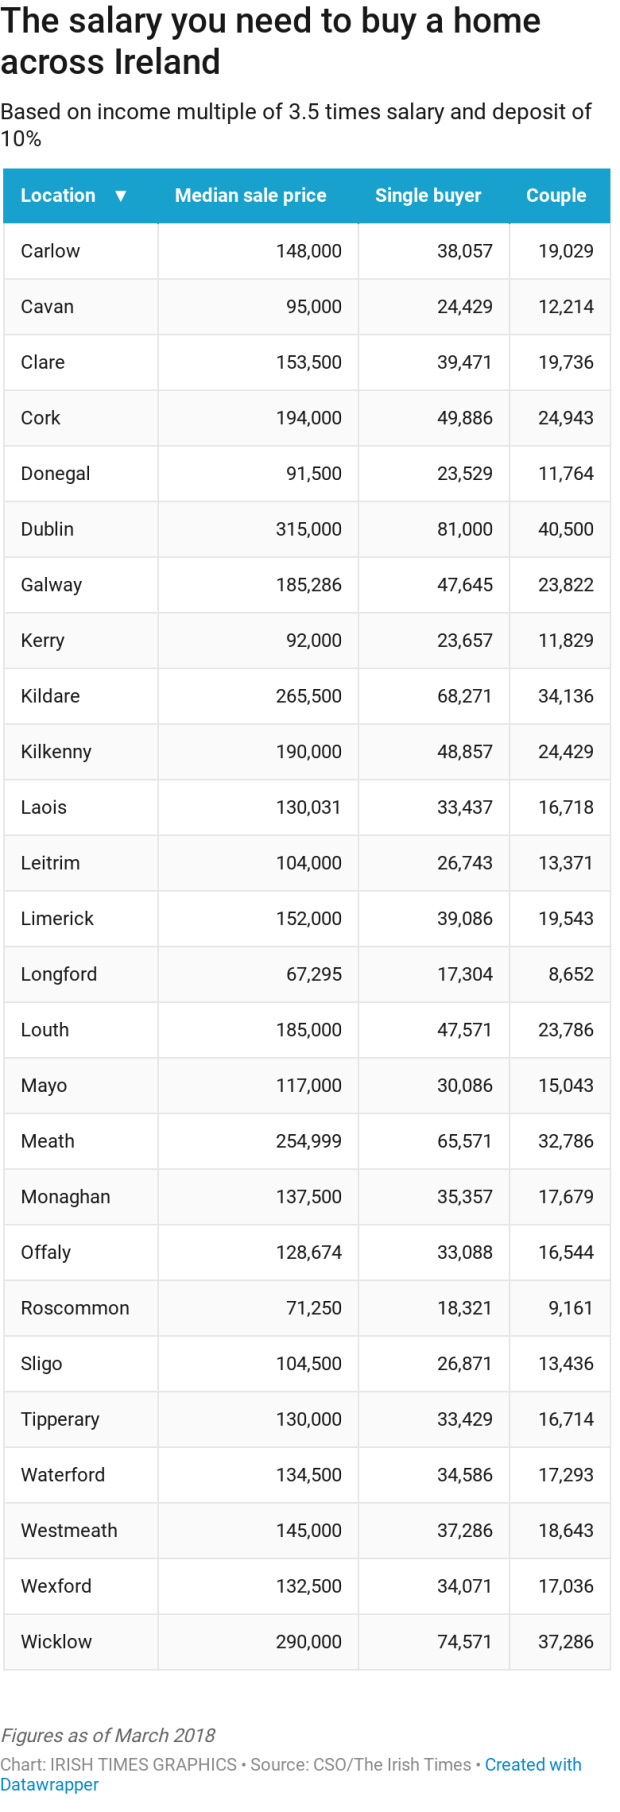 What salary will buy a typical house around Ireland?